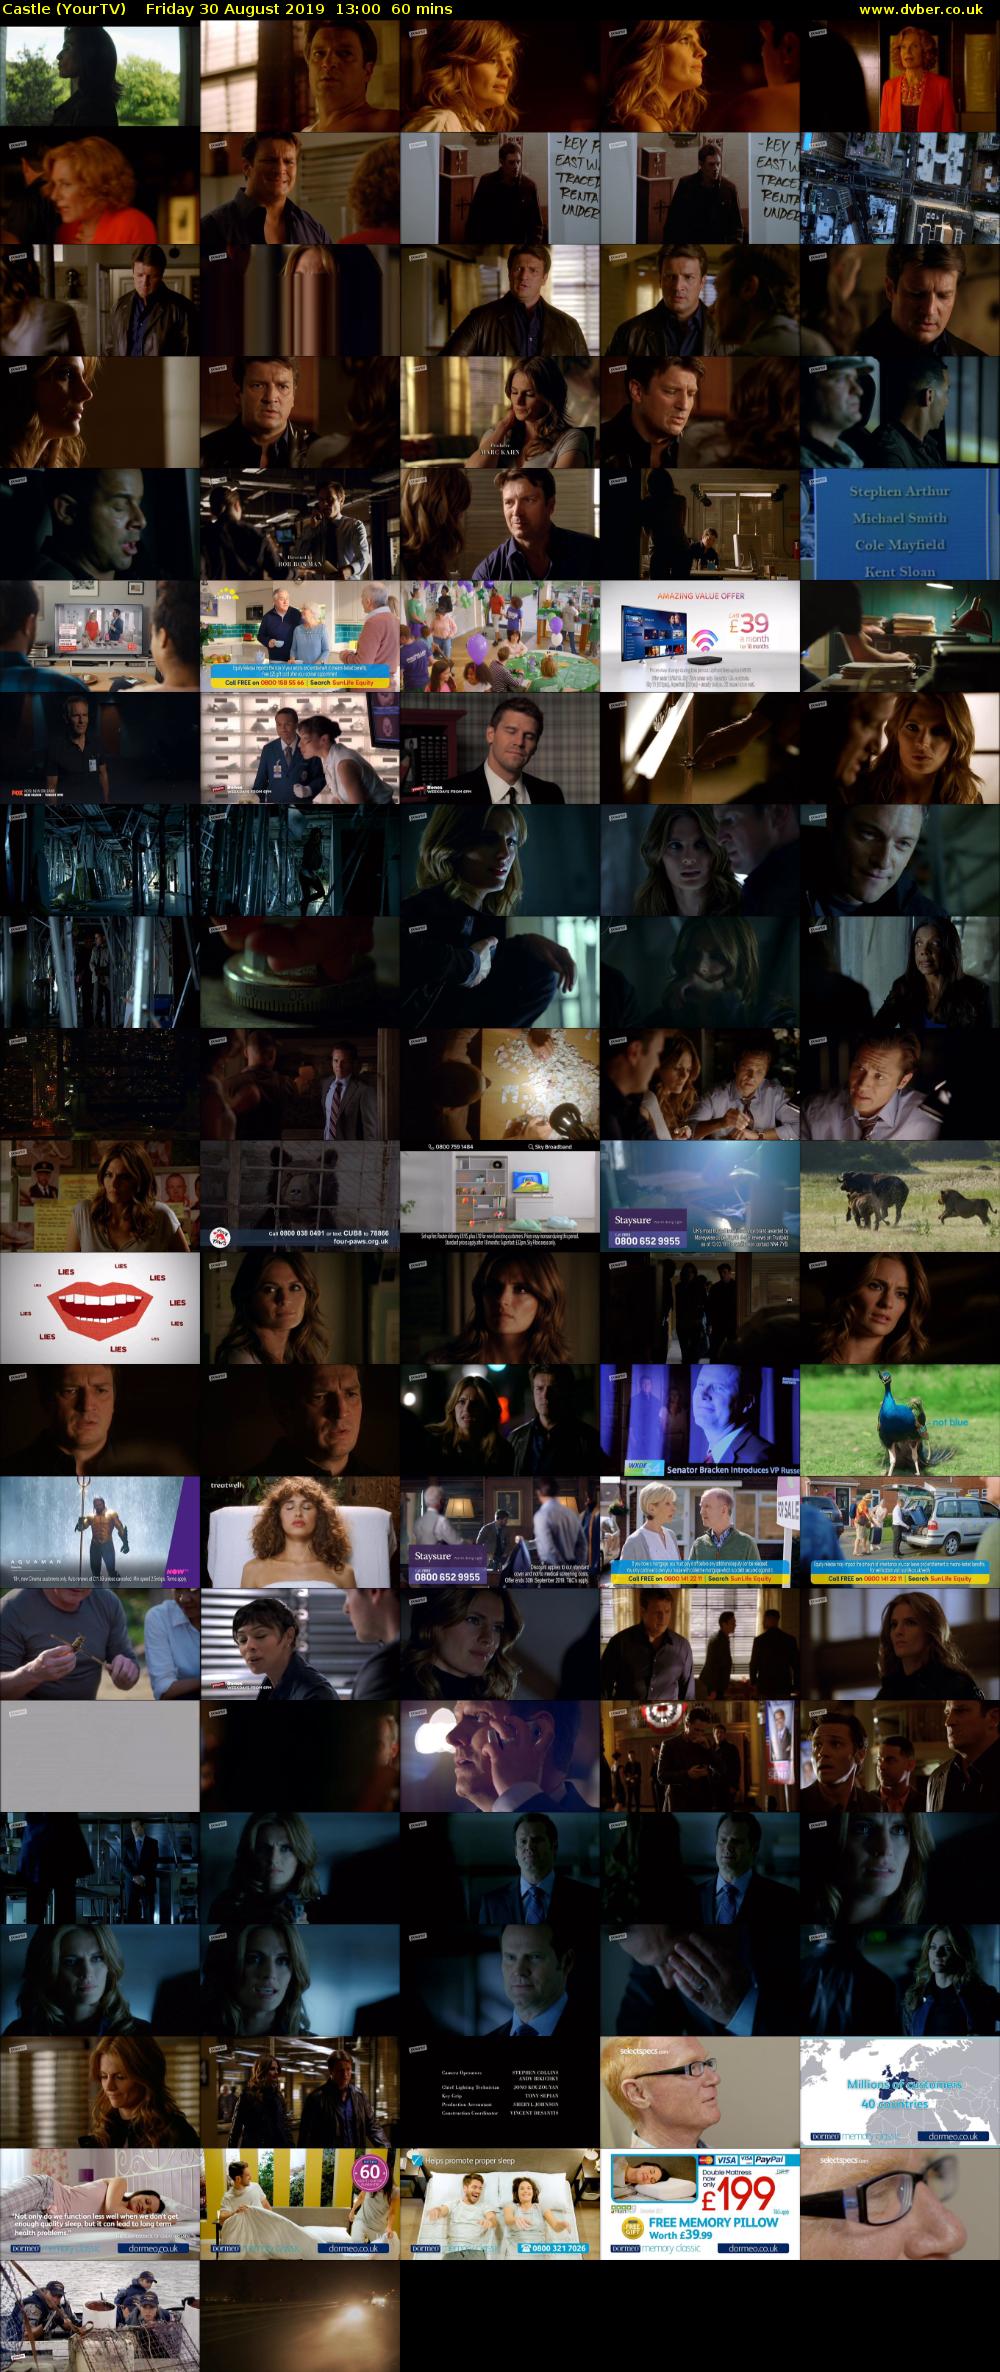 Castle (YourTV) Friday 30 August 2019 13:00 - 14:00